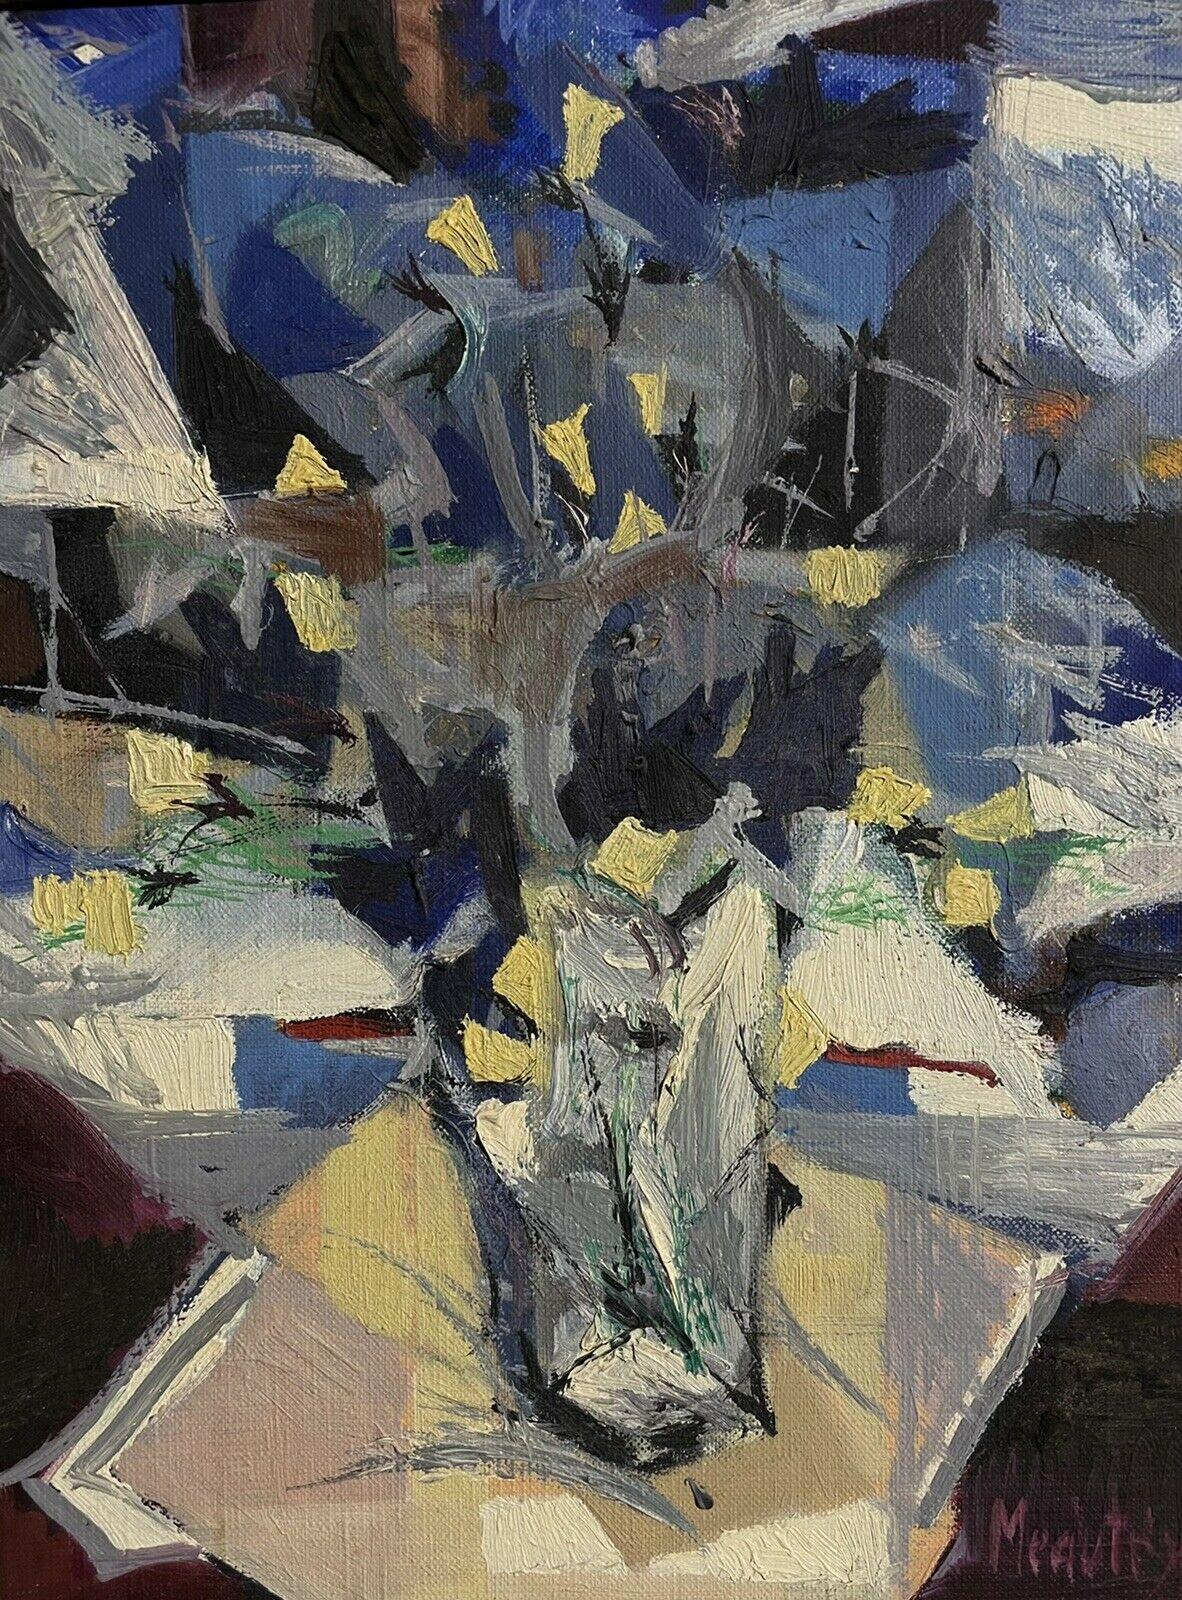 Artist/ School: French cubist/ abstract artist, signed, circa 1970's

Title: Blue & white flowers in a vase

Medium: oil painting on canvas, framed

framed: 20 x 17 inches
painting: 14 x 10.75 inches

Provenance: private French